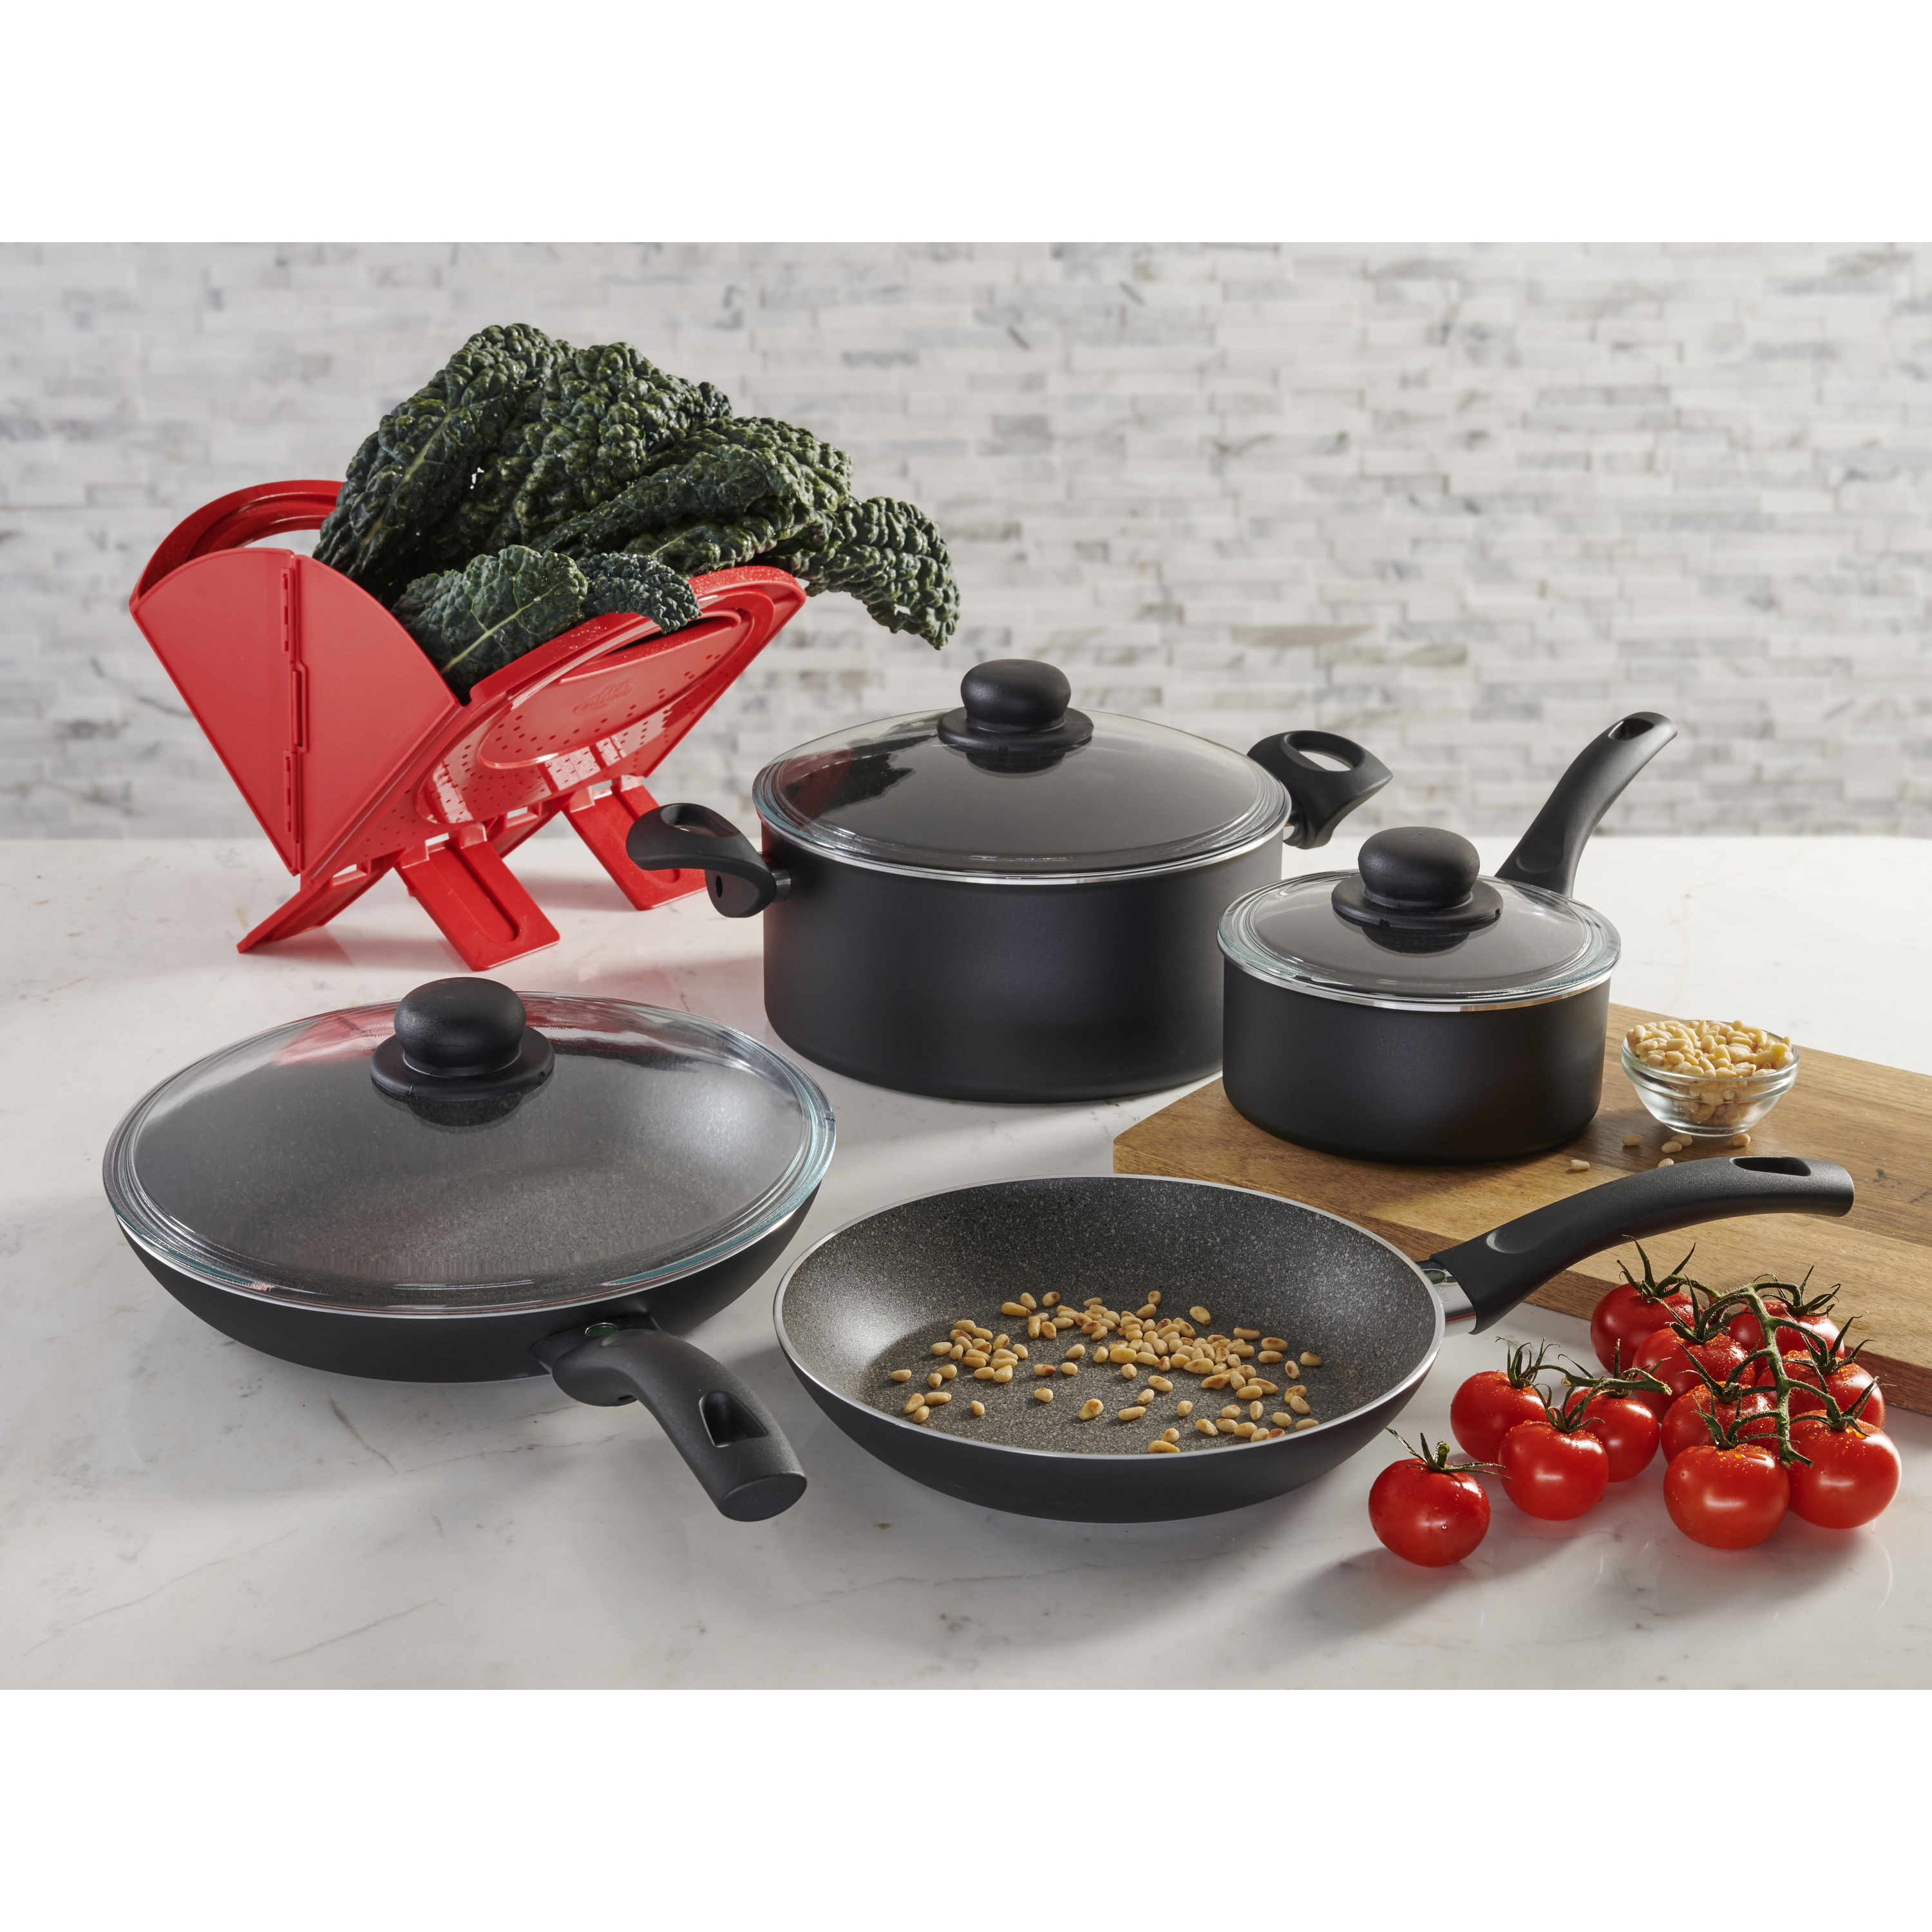 Ballarini Parma By Henckels 10-Piece Forged Aluminum Nonstick Cookware Set,  Pots And Pans Set, Granite, Made In Italy